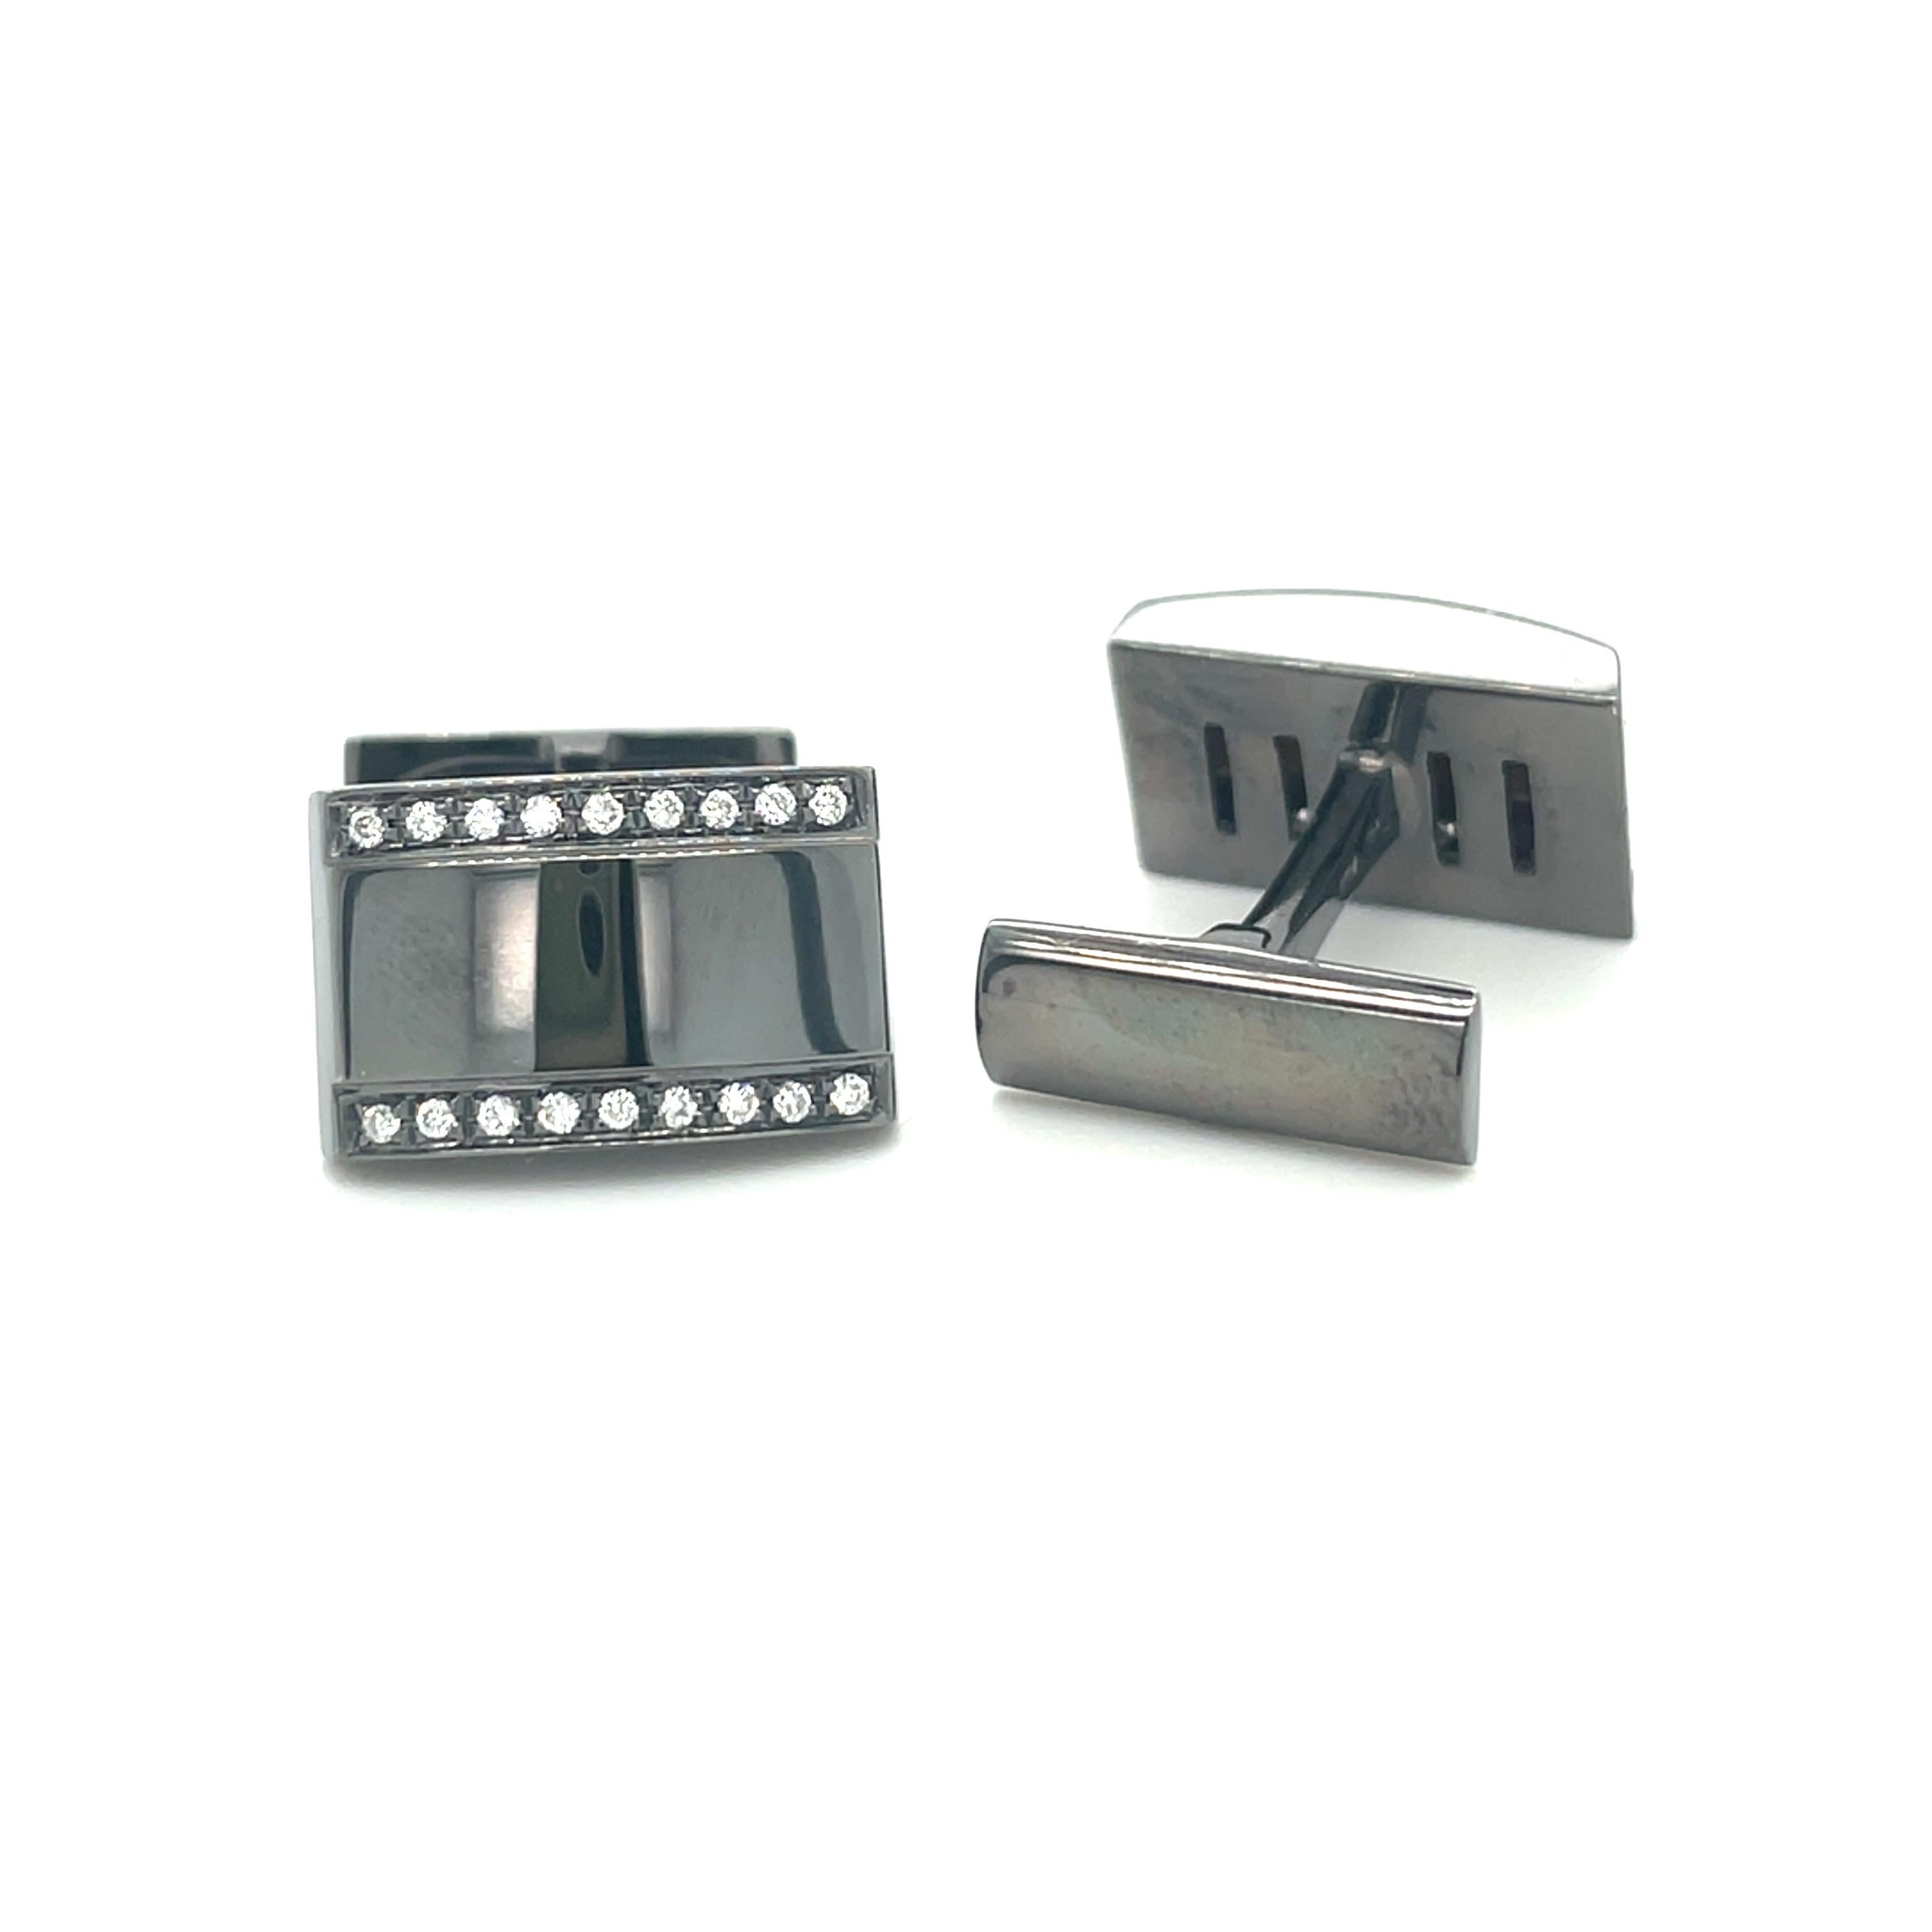 These white gold cufflinks are from Men's Collection. These cufflinks are decorated with white gold (black rhodium) and diamonds G color VS clarity 0.26 ct. The dimensions of the cufflinks are 1.5cm x 1cm. These cufflinks are a perfect upgrade to